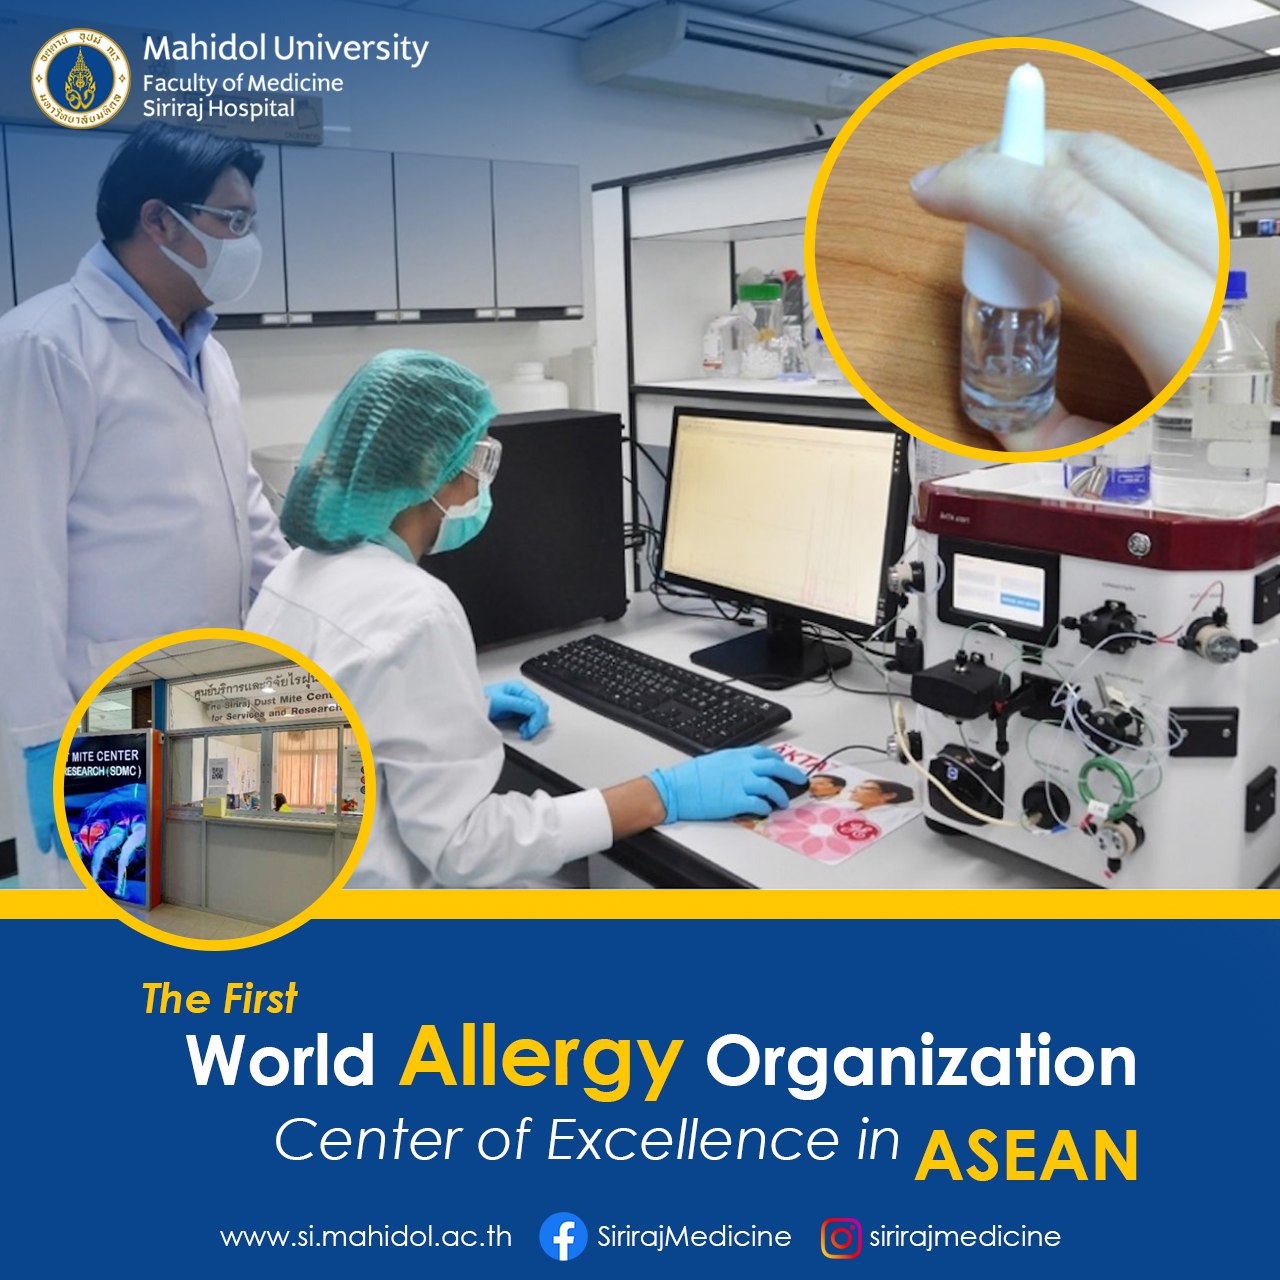 The first world allergy organization center of excellence in ASEAN